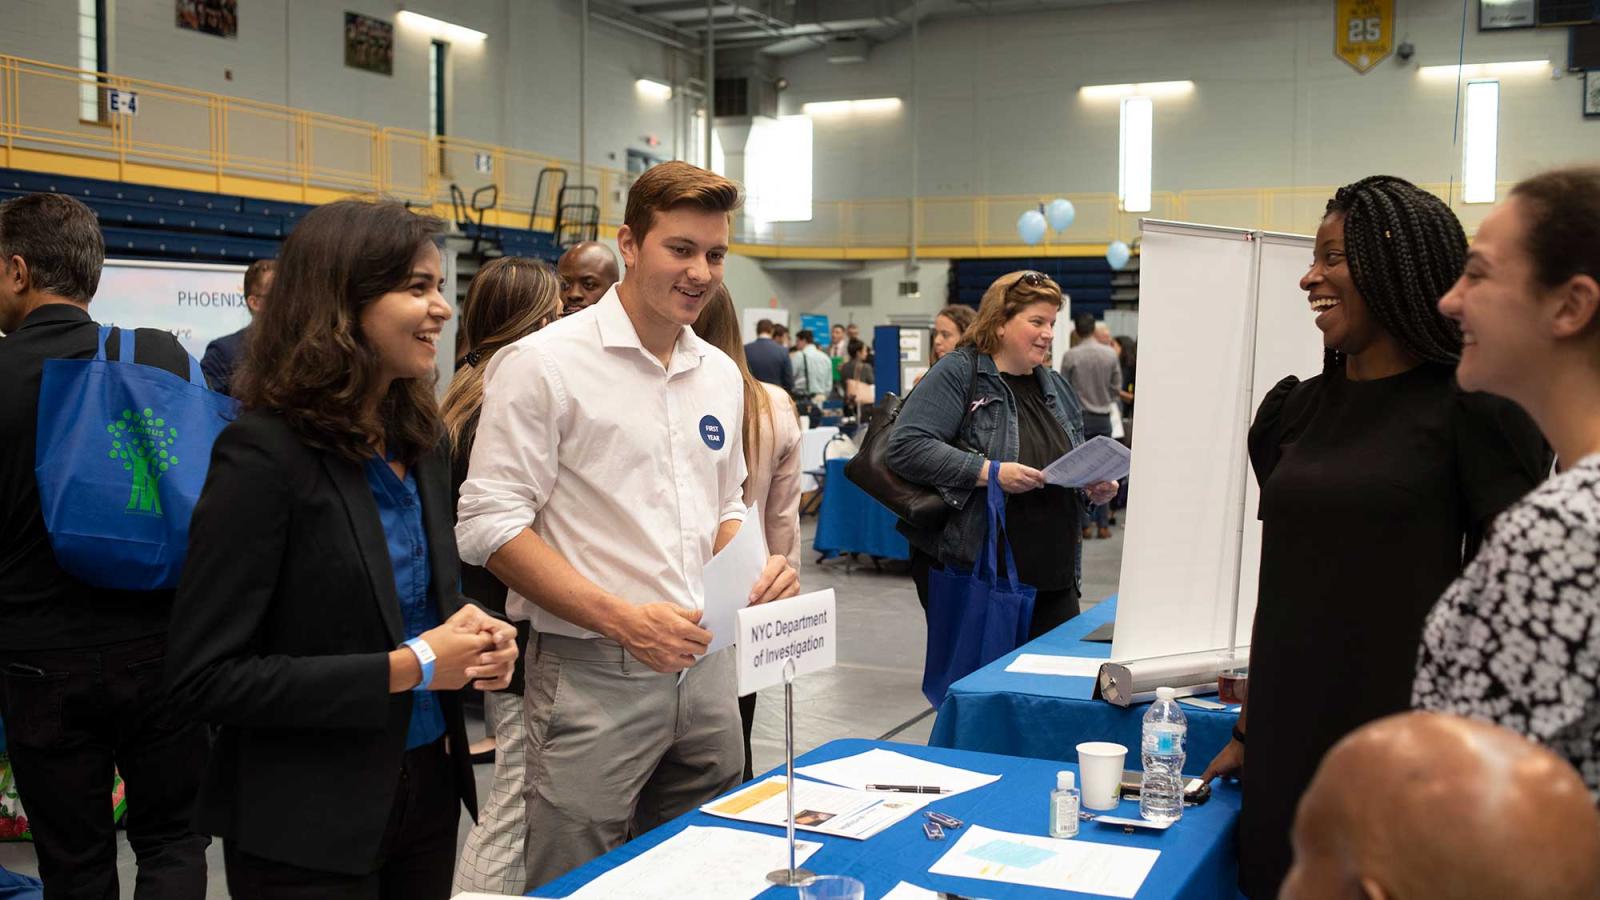 Students and employers at Pace's Pleasantville Career Fair in 2019